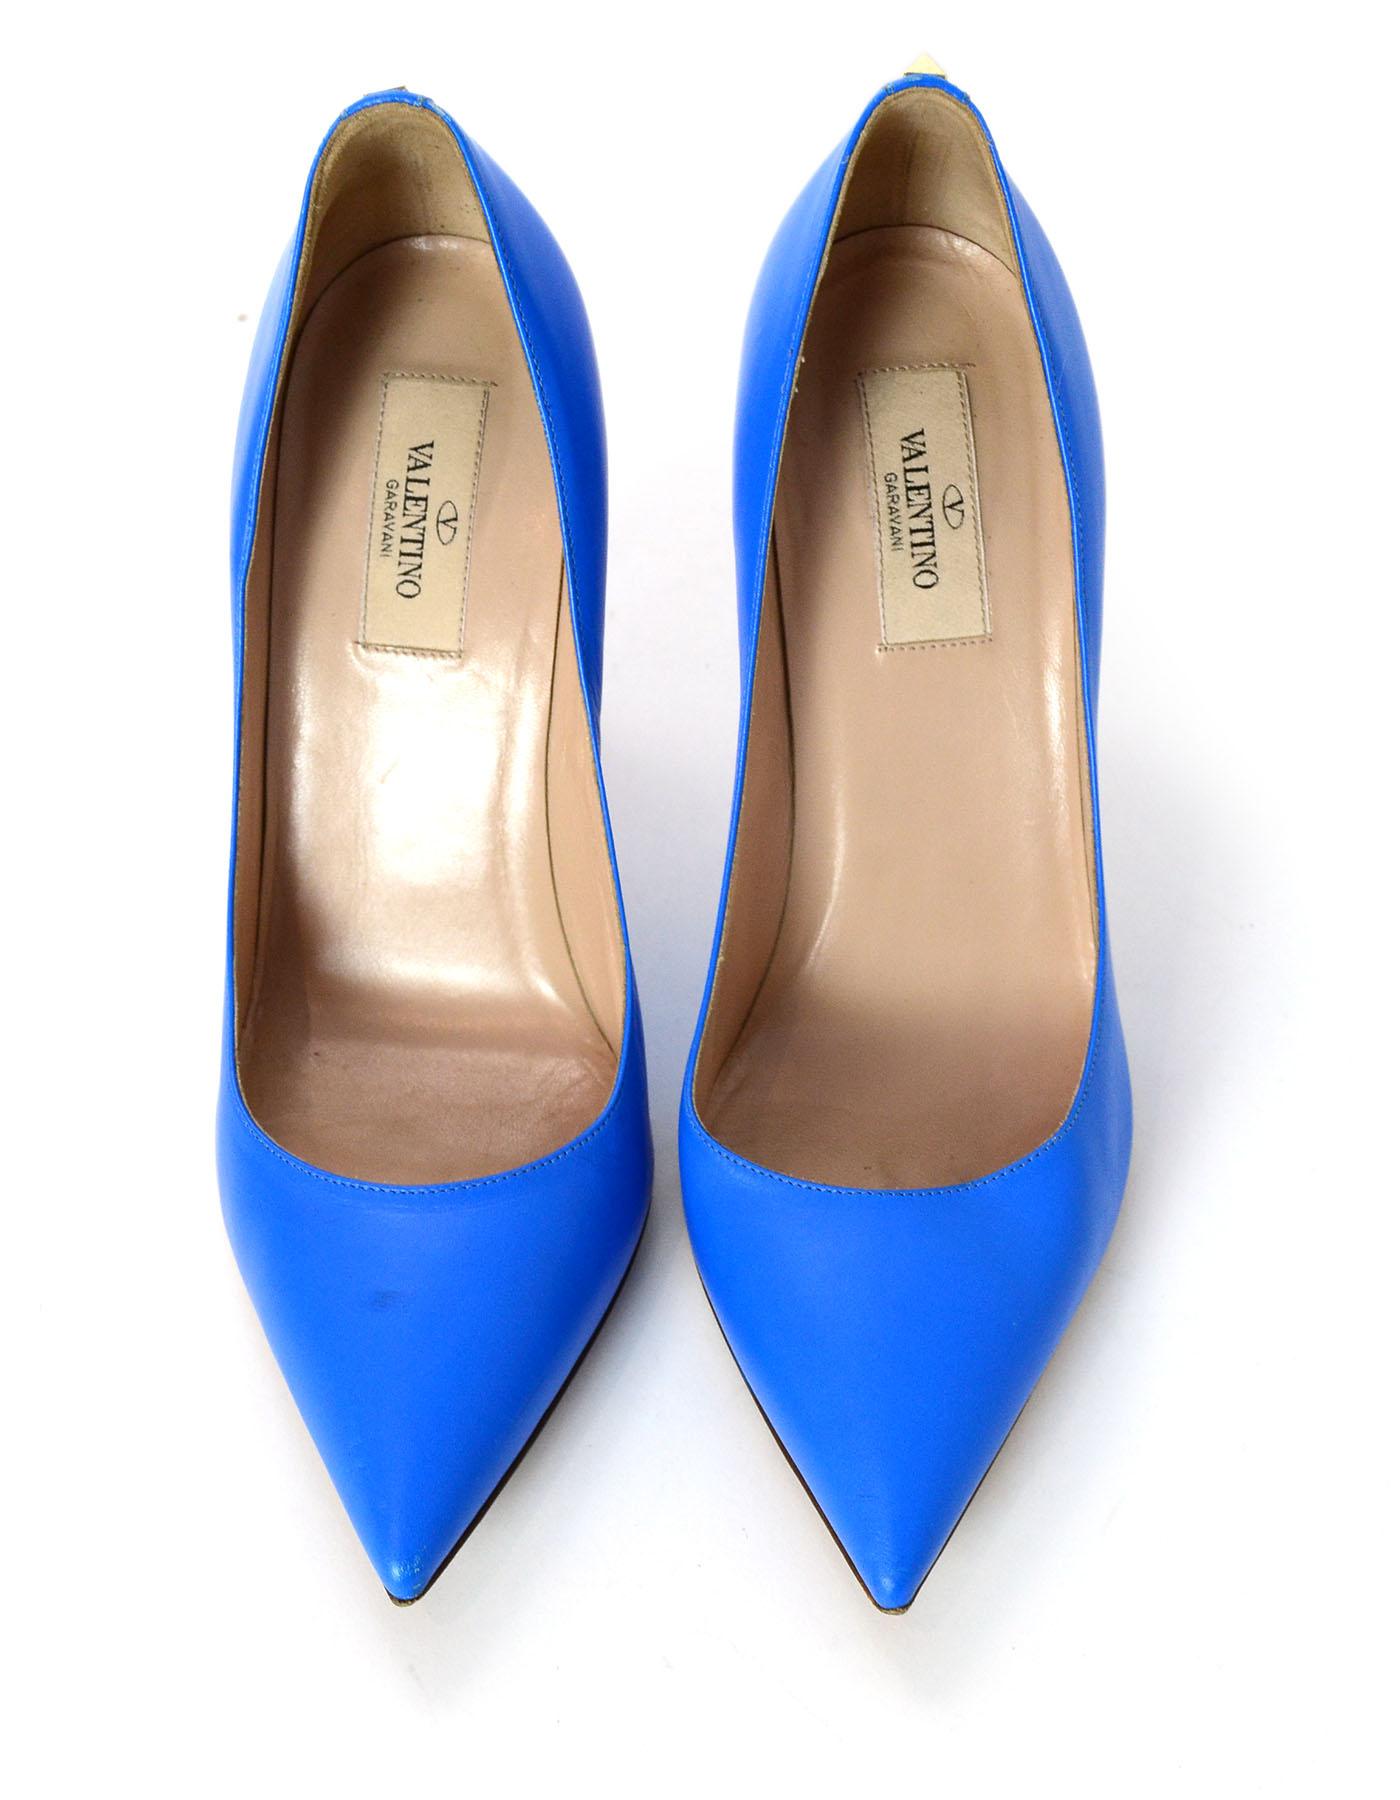 Valentino Blue Leather New Plain 100mm Pumps Sz 38

    Made In: Italy
    Color: Blue
    Materials: Leather, metal
    Closure/Opening: Slide on
    Sole Stamp: Valentino Garavani Made in Italy 38
    Overall Condition: Very good pre-owned